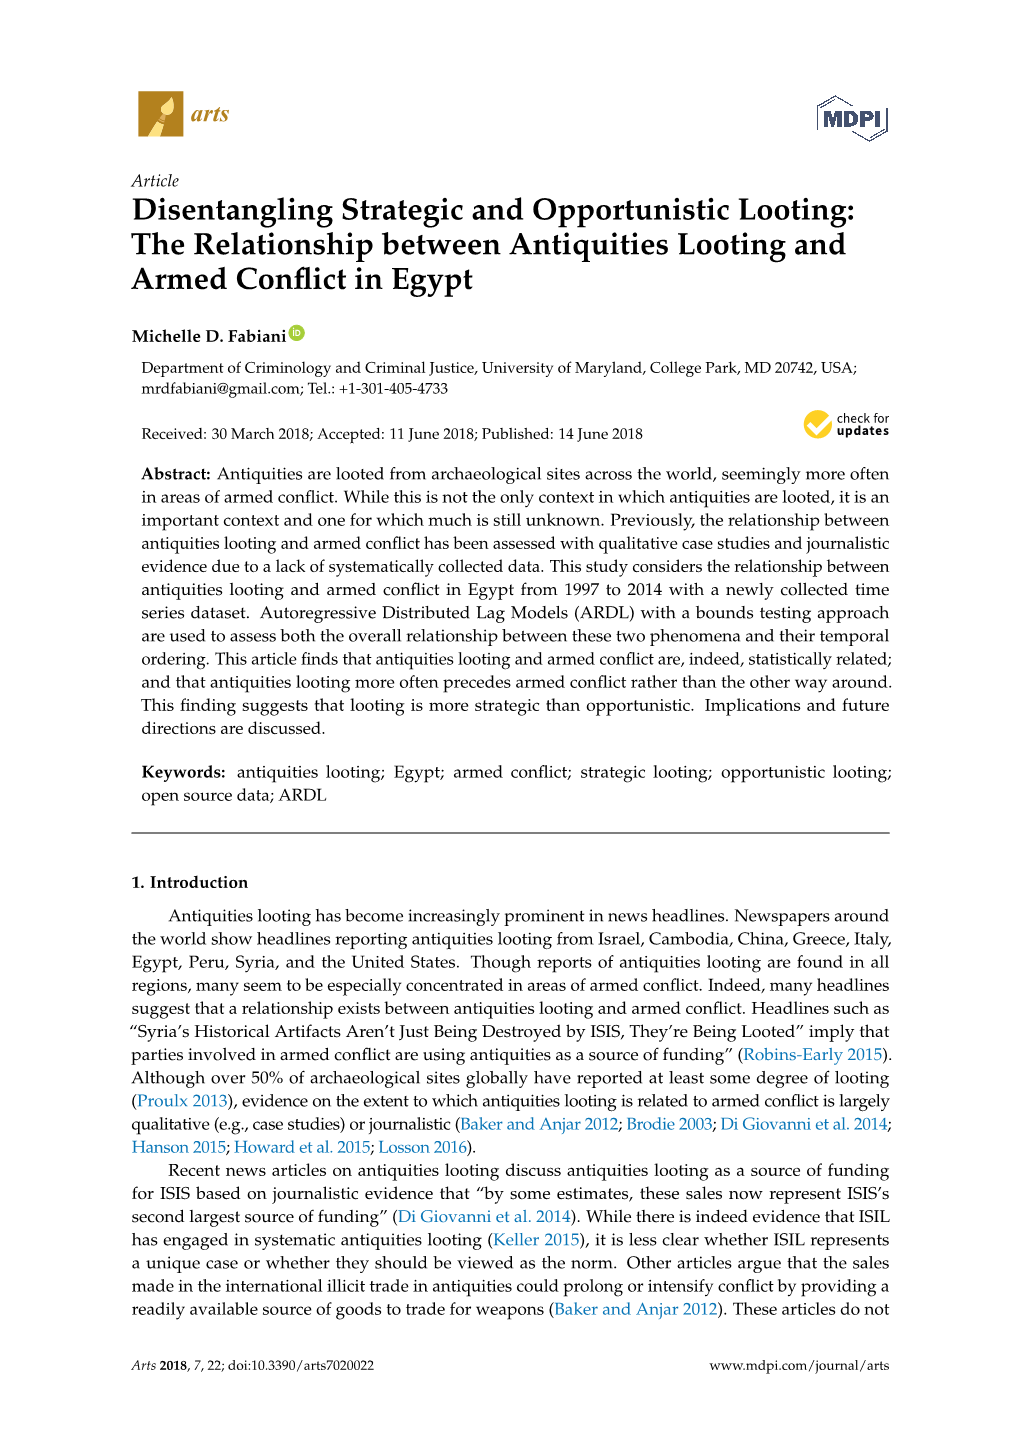 Disentangling Strategic and Opportunistic Looting: the Relationship Between Antiquities Looting and Armed Conflict in Egypt